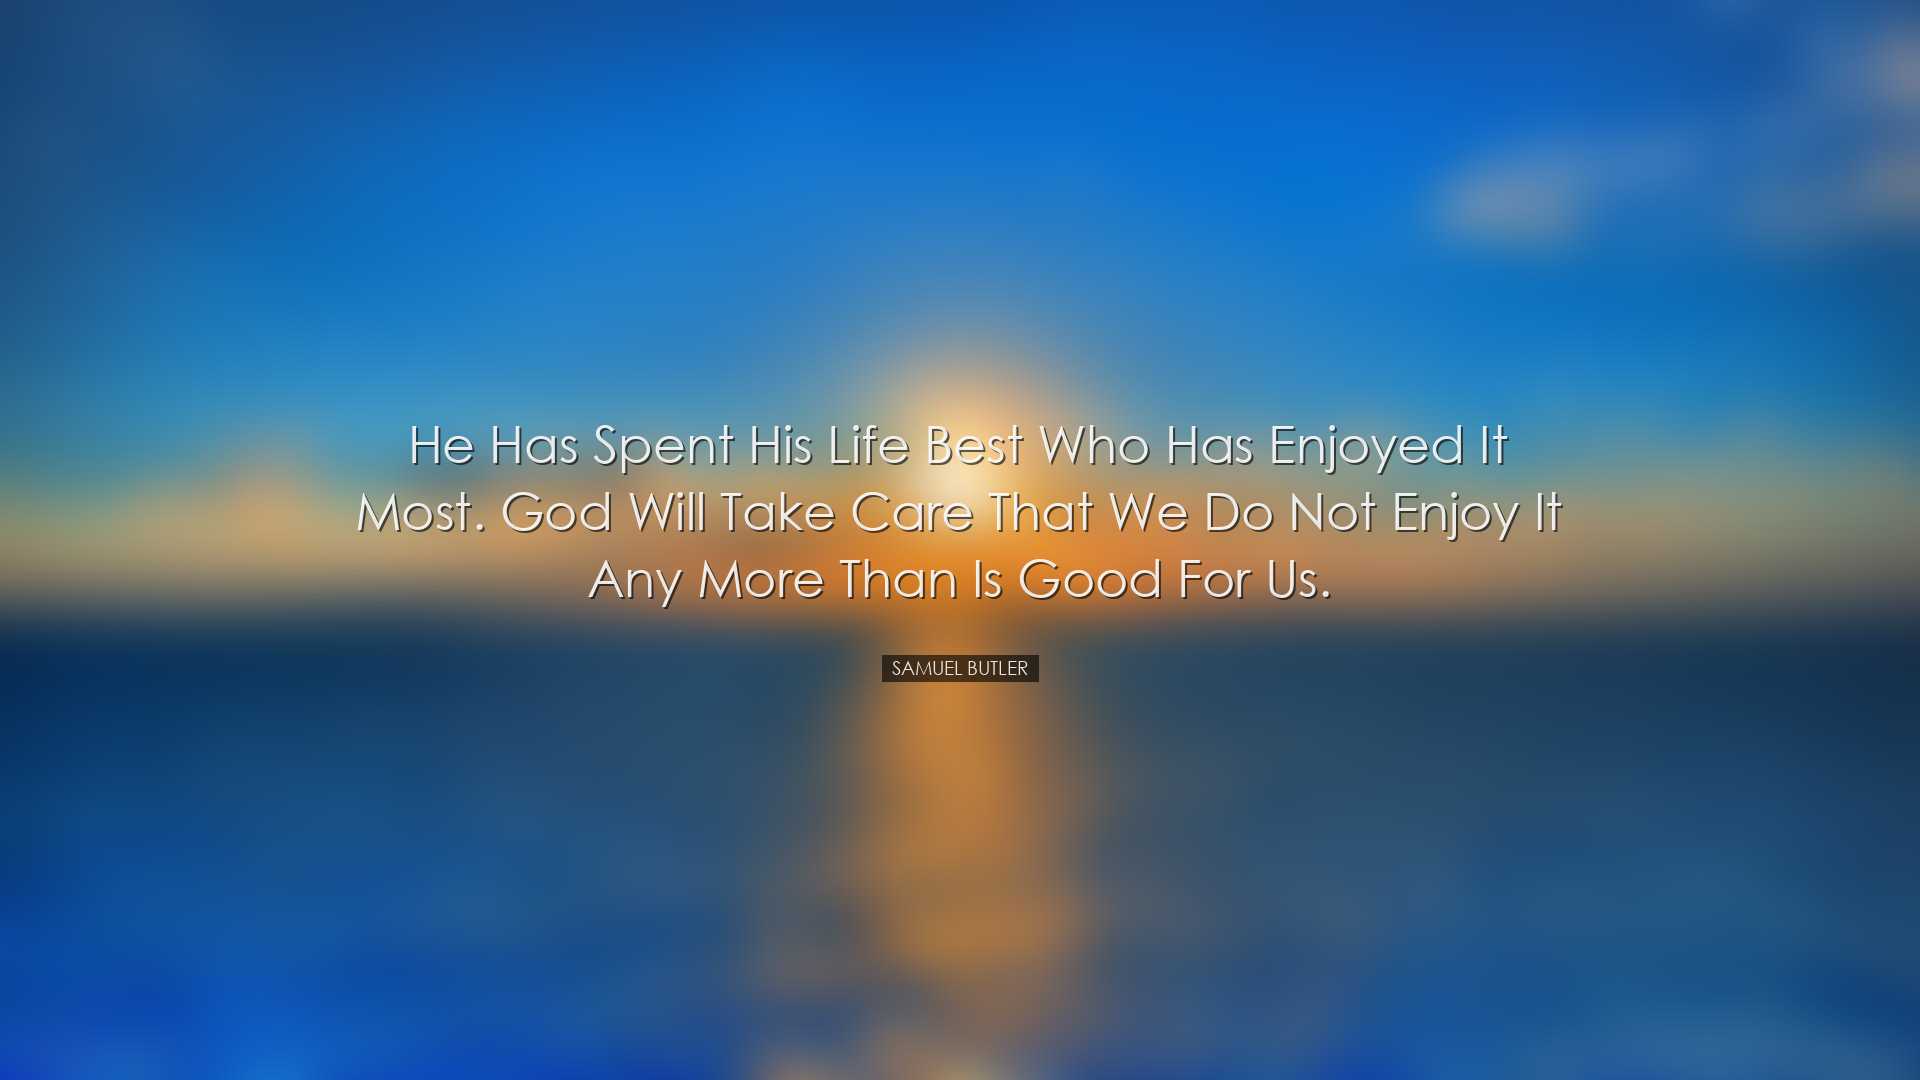 He has spent his life best who has enjoyed it most. God will take